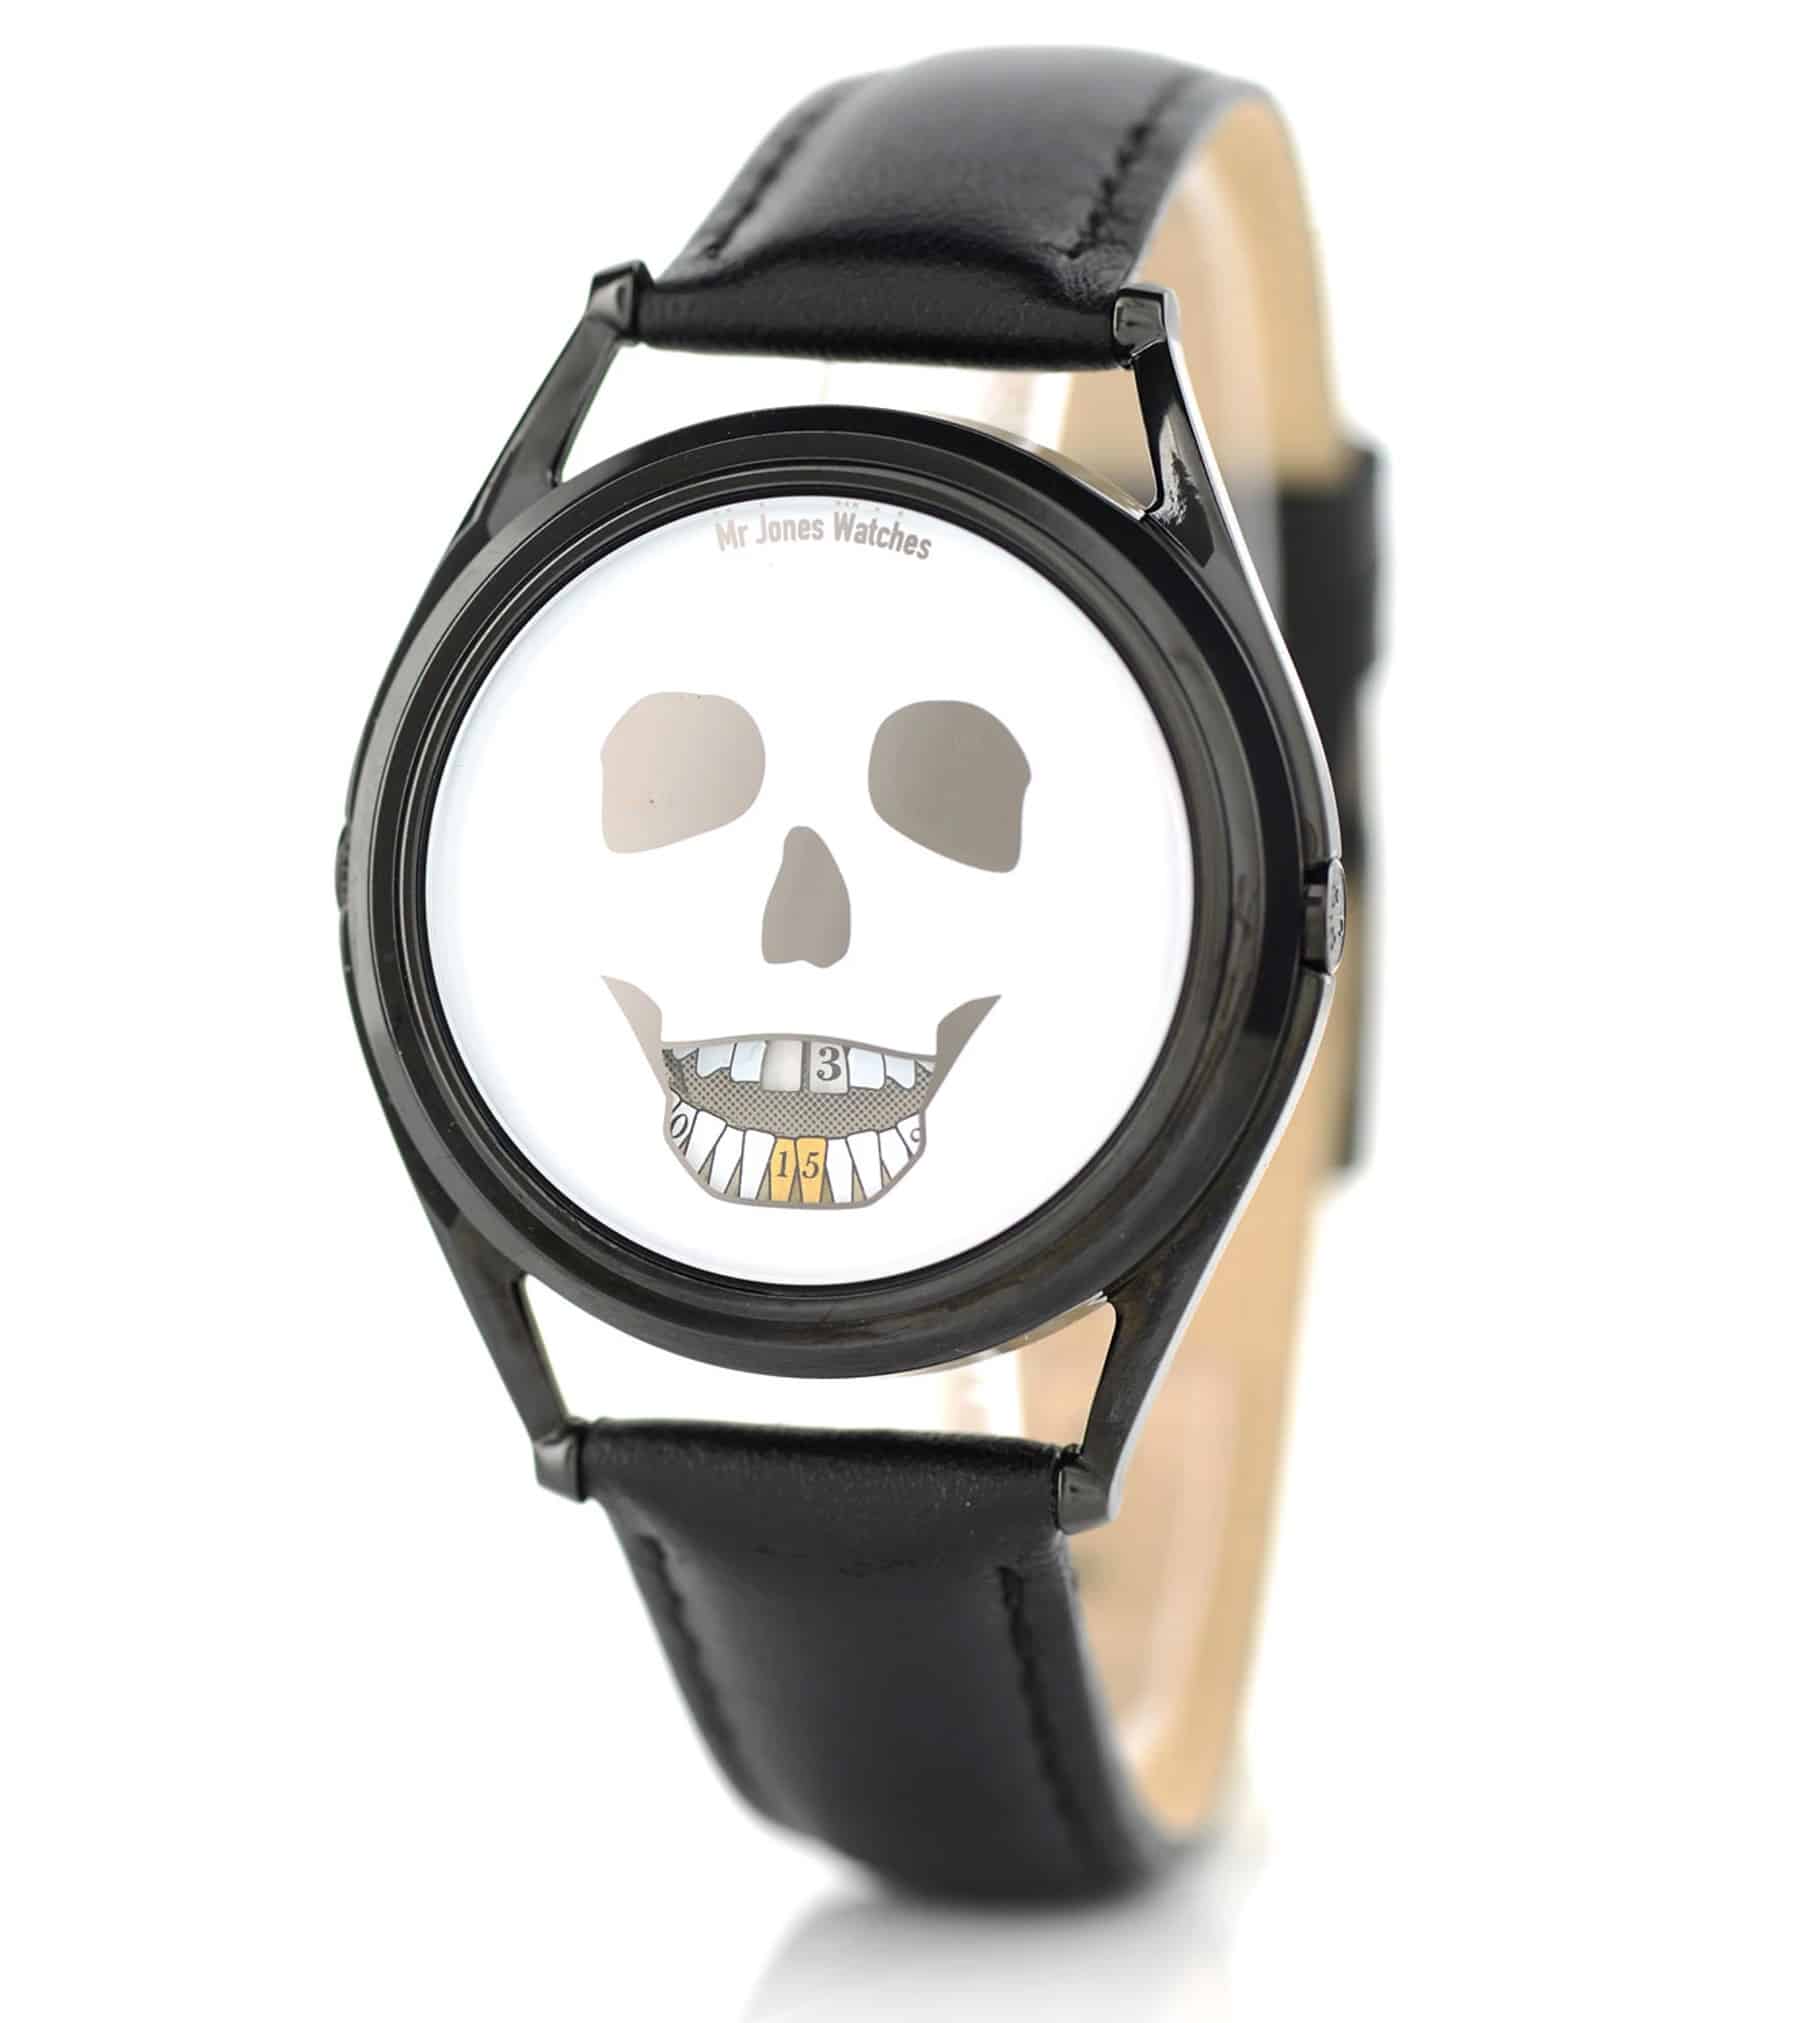 Six Halloween-themed watches that absolutely will spook up your wrist game